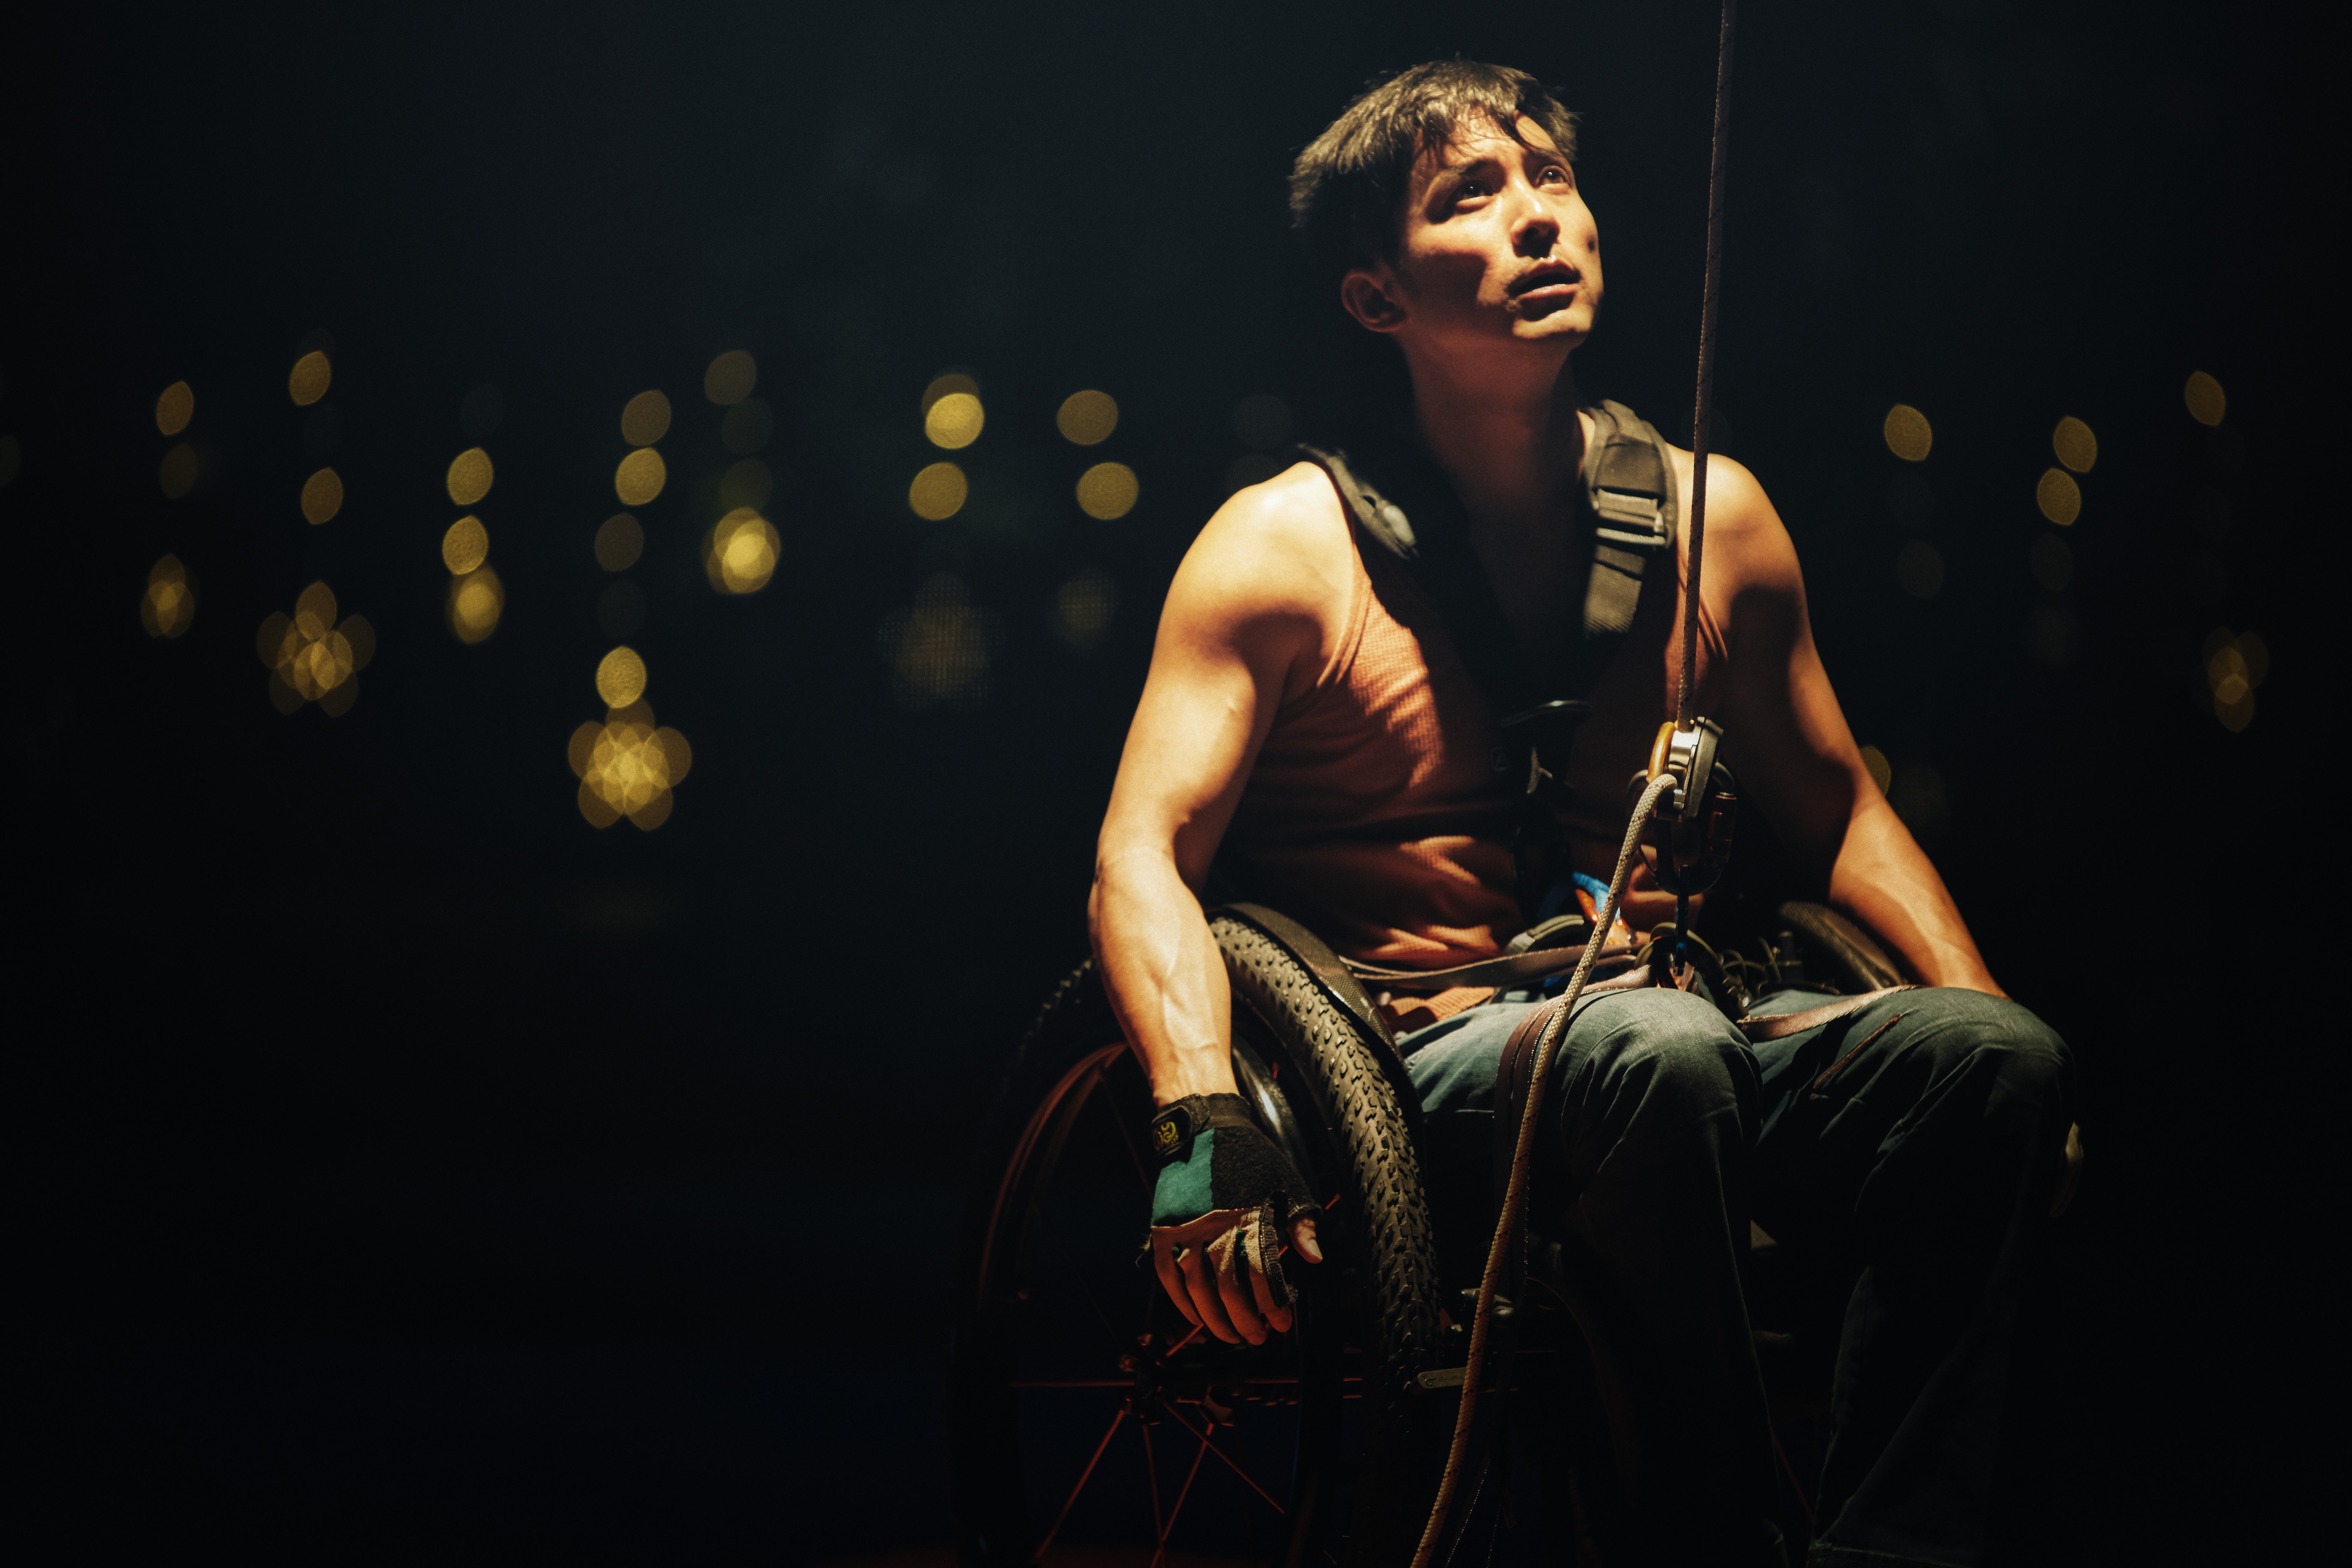 Alex Lam stars in 'Lion Rock', which is based on the true story of Hong Kong sport climber Lai Chi-wai.